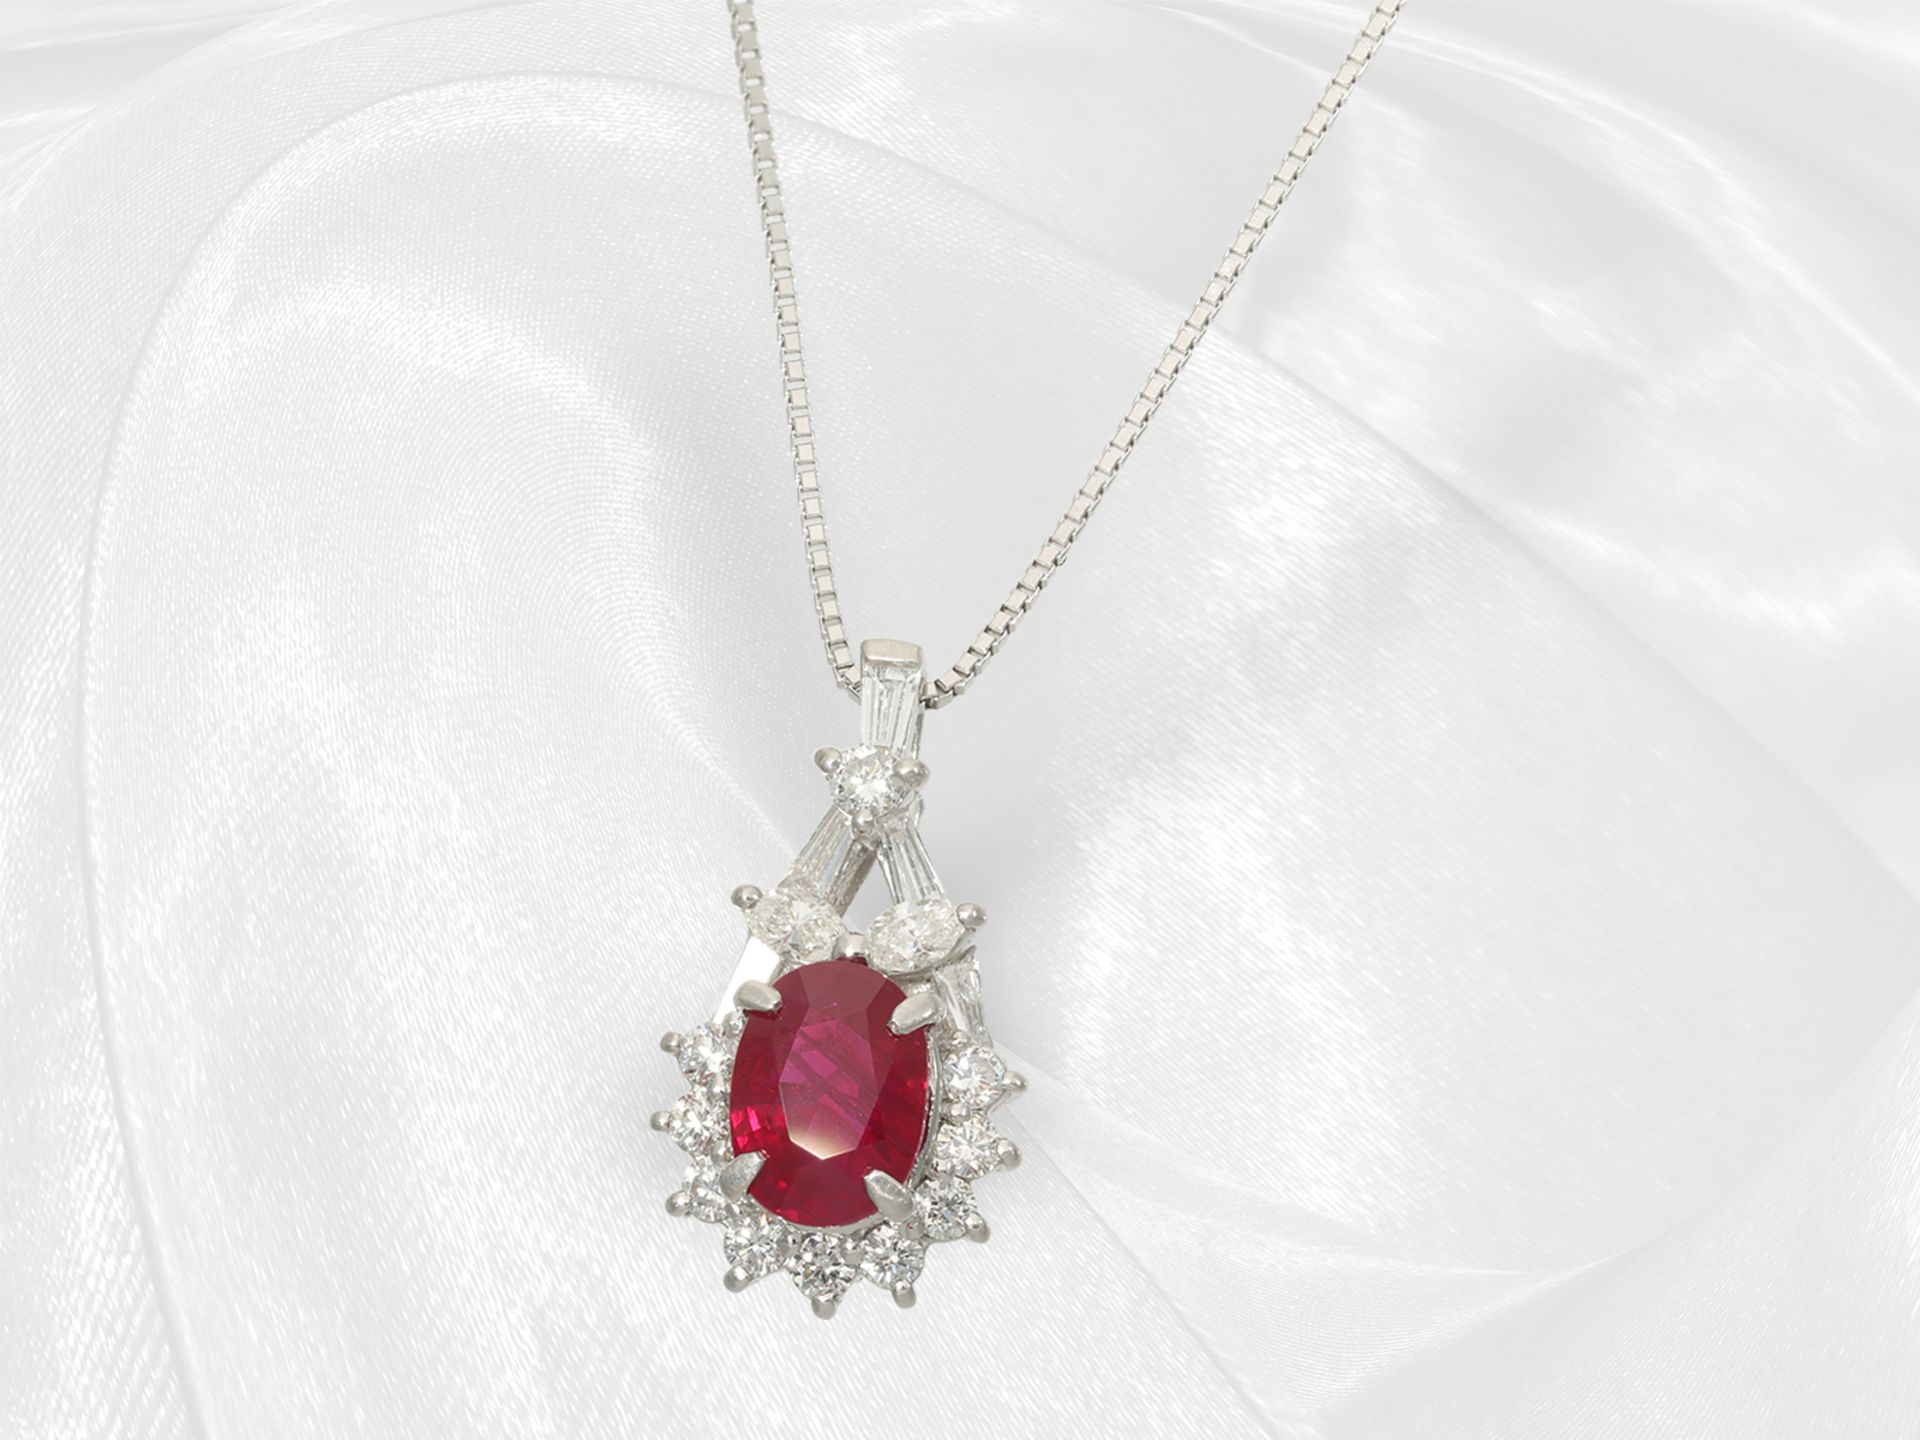 Necklace/pendant: extremely fine platinum jewellery, extremely rare Burma Ruby 2ct "Vivid Red-Pigeon - Image 3 of 4